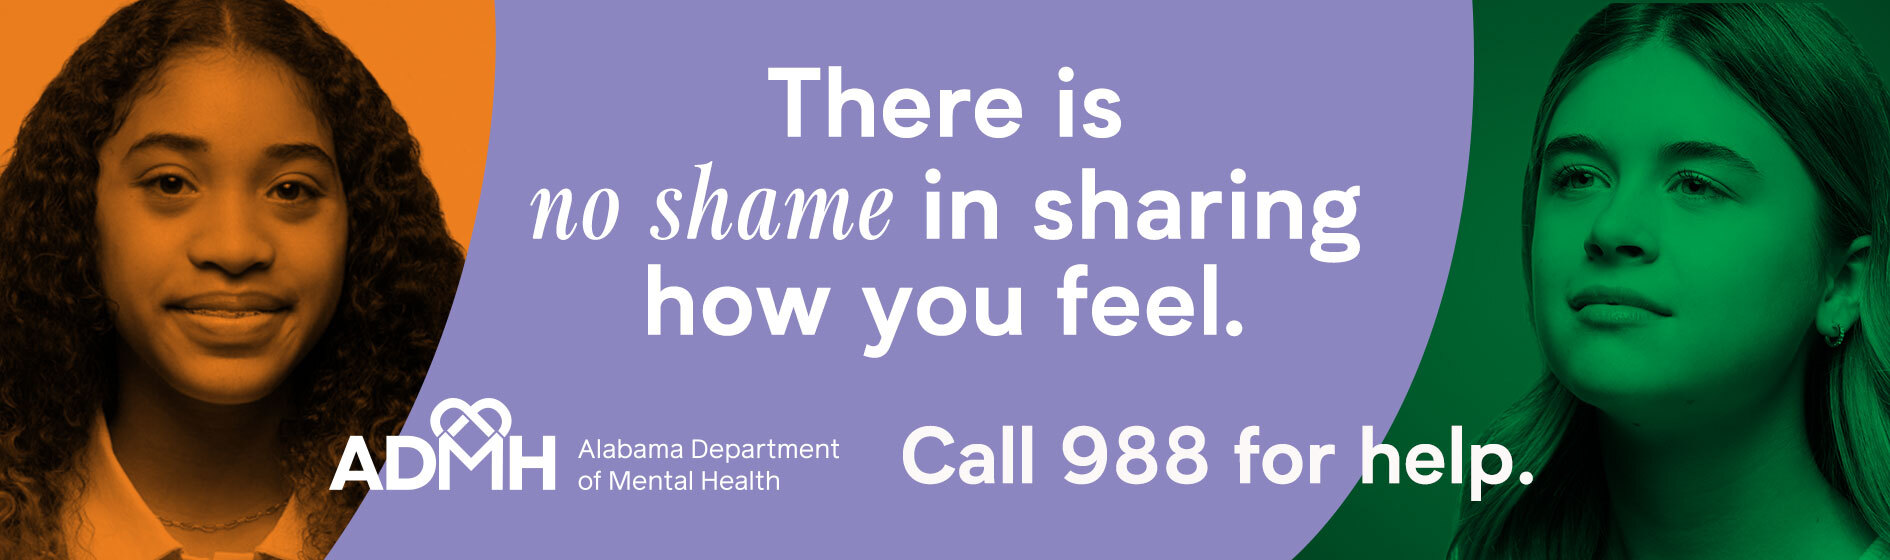 There is no shame in sharing how you feel. Call 988 for help.